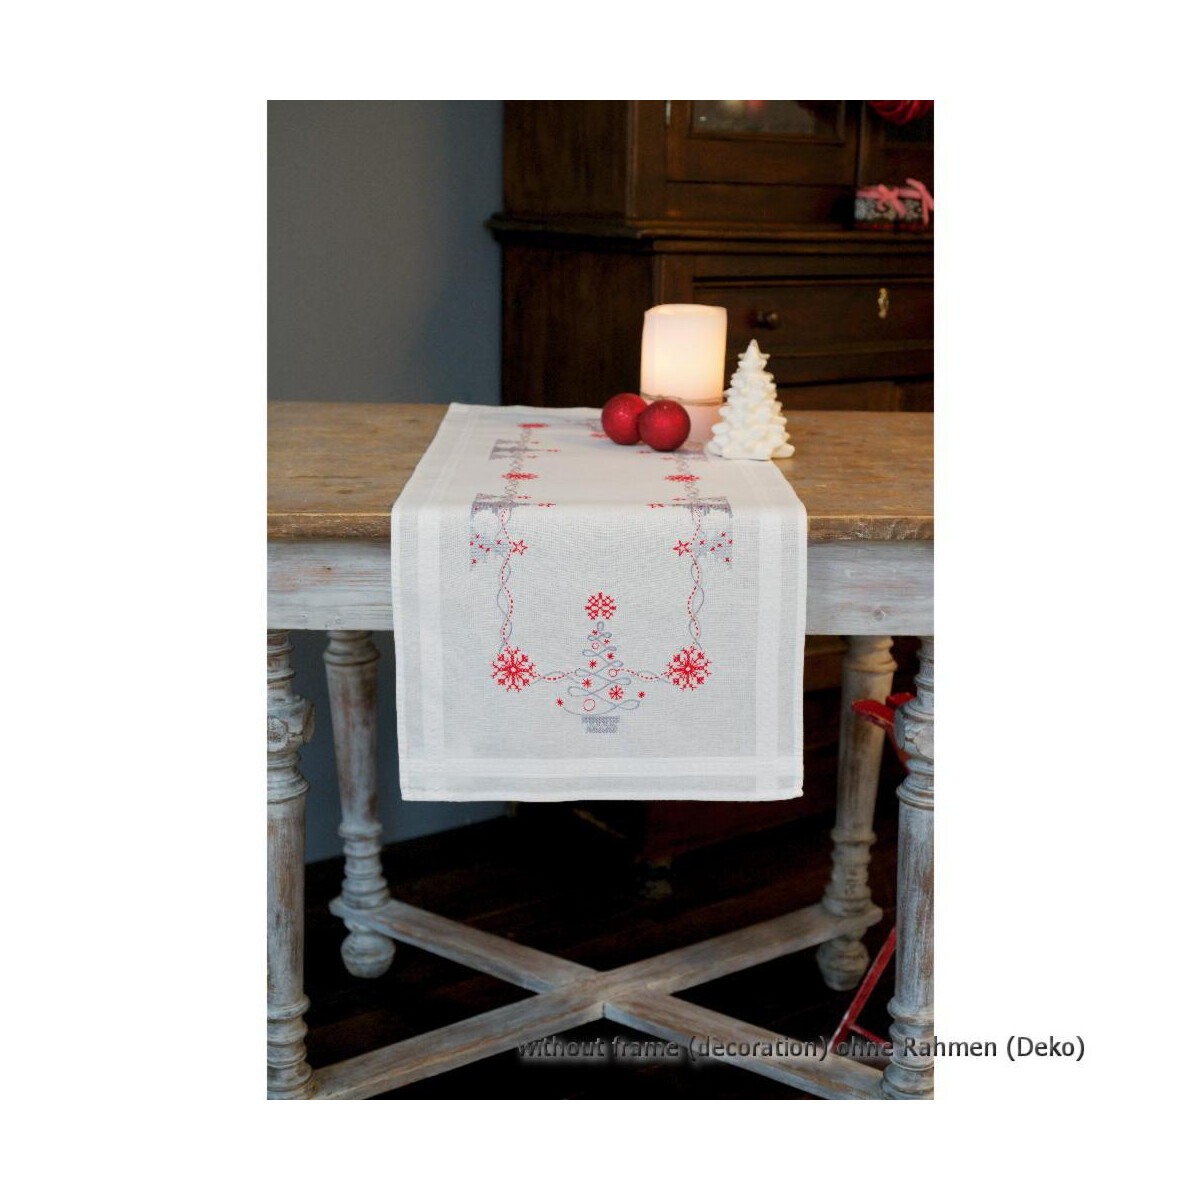 Vervaco tablerunner stitch embroidery kit Christmas red /...